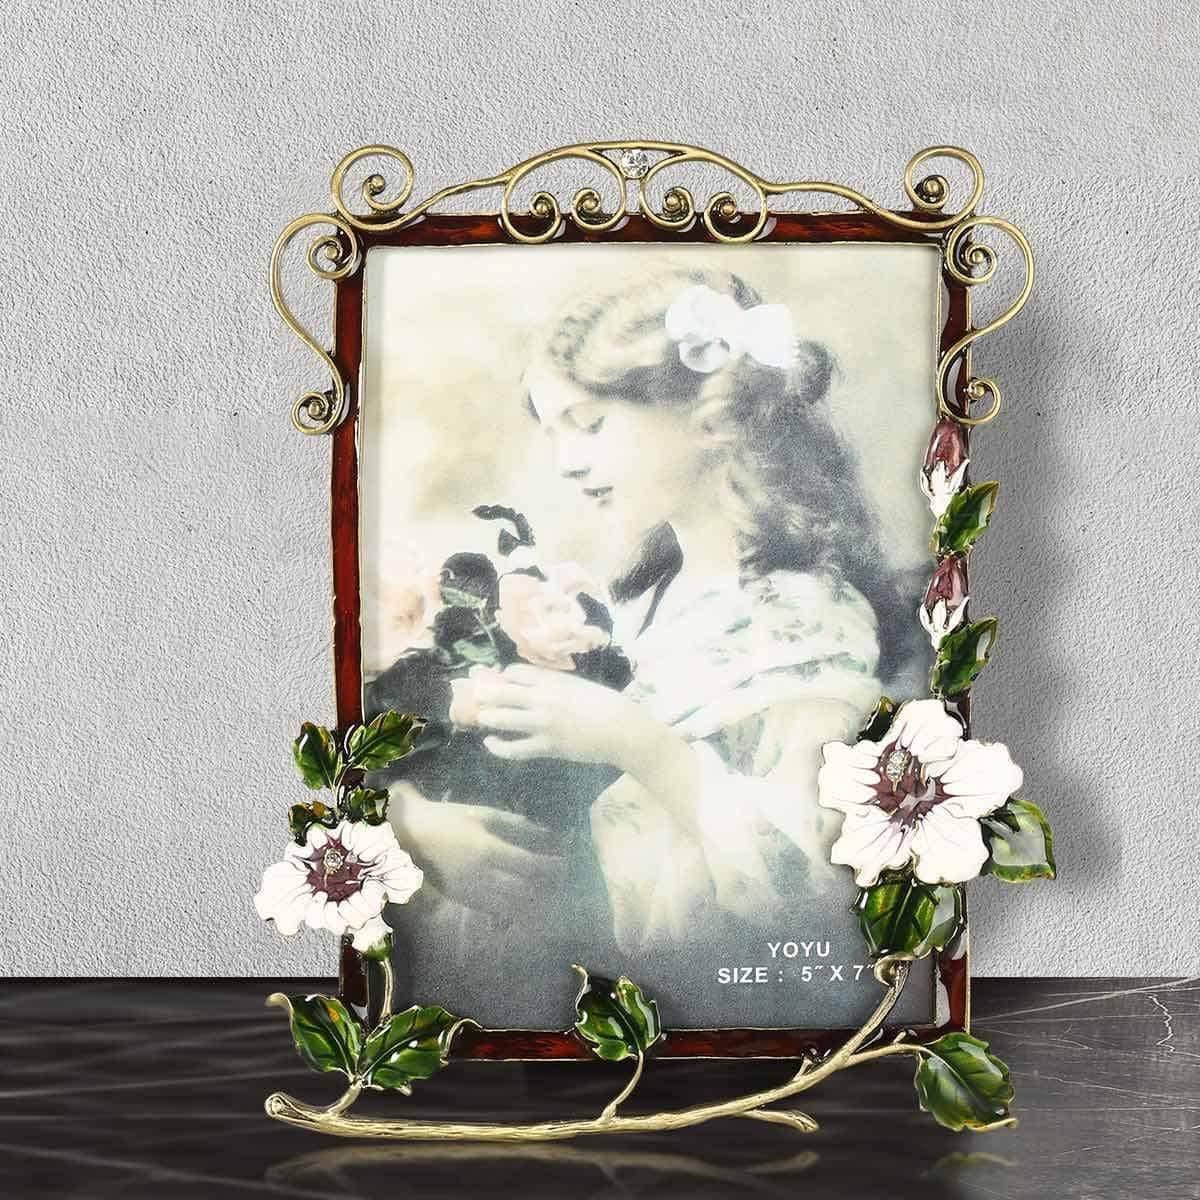 Branches & Flower Alloy Photo Frame - Display Memories in Style